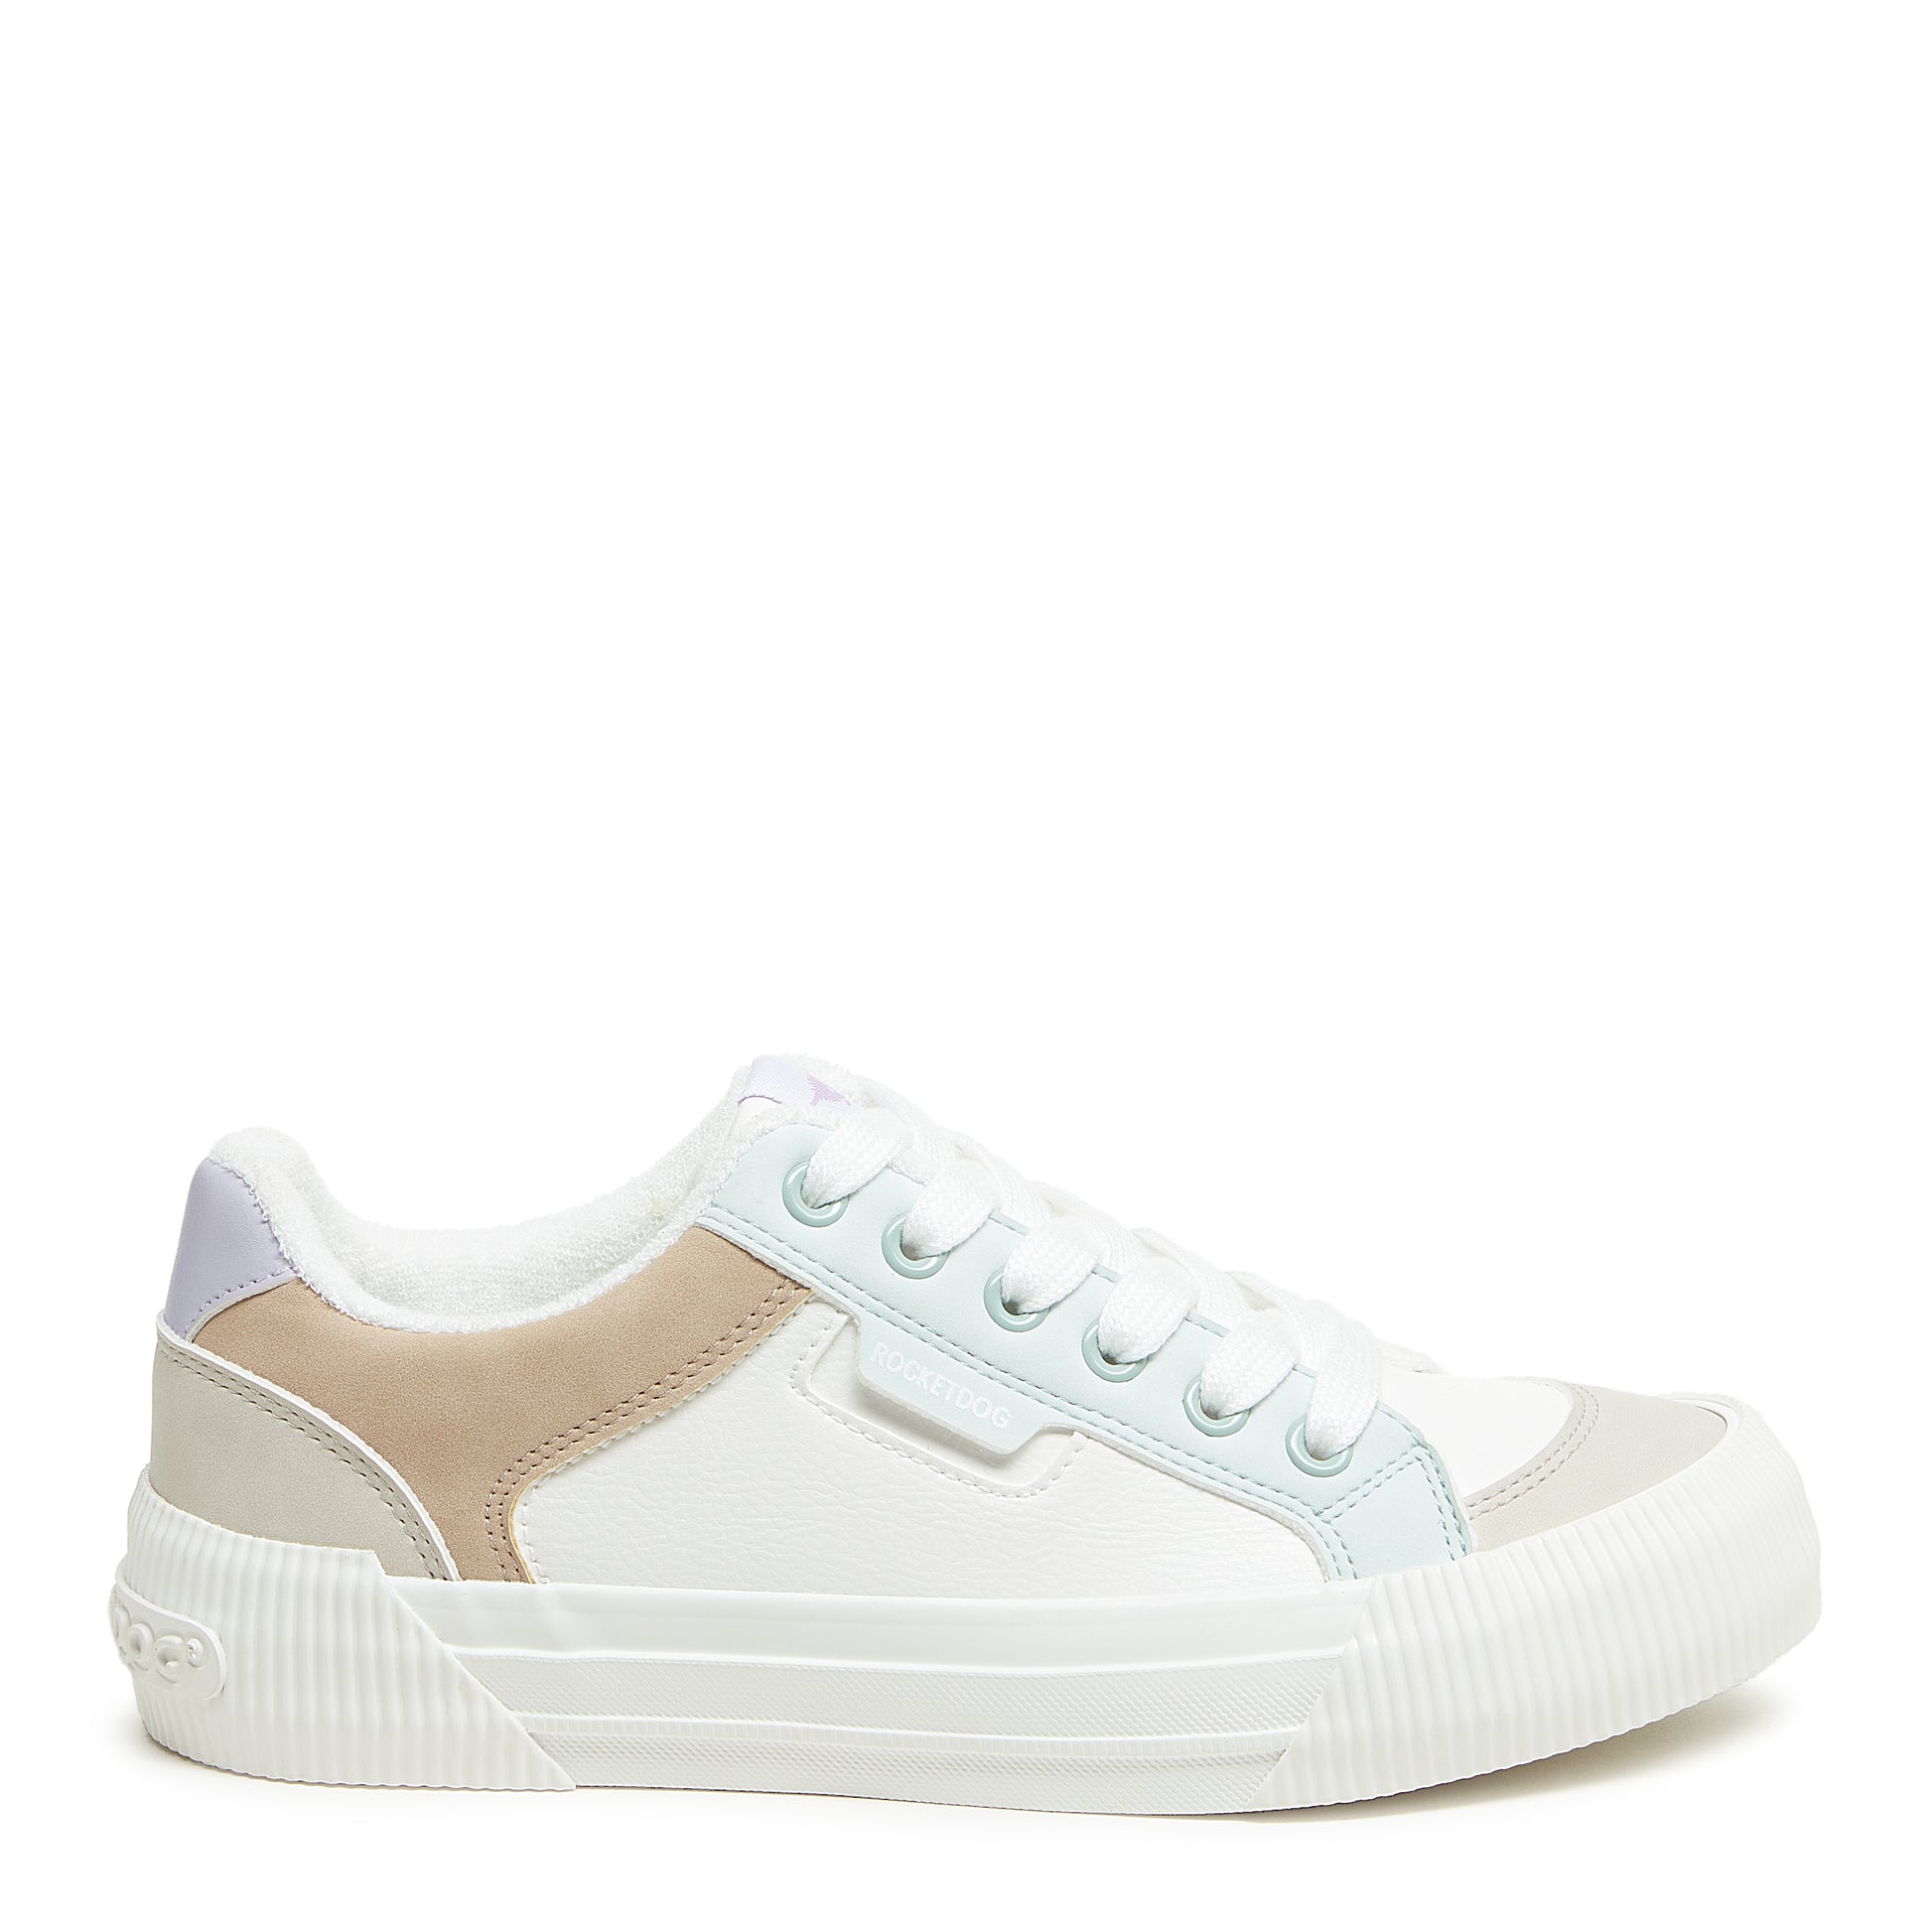 Rocket Dog® Cheery White Color Block Sneaker